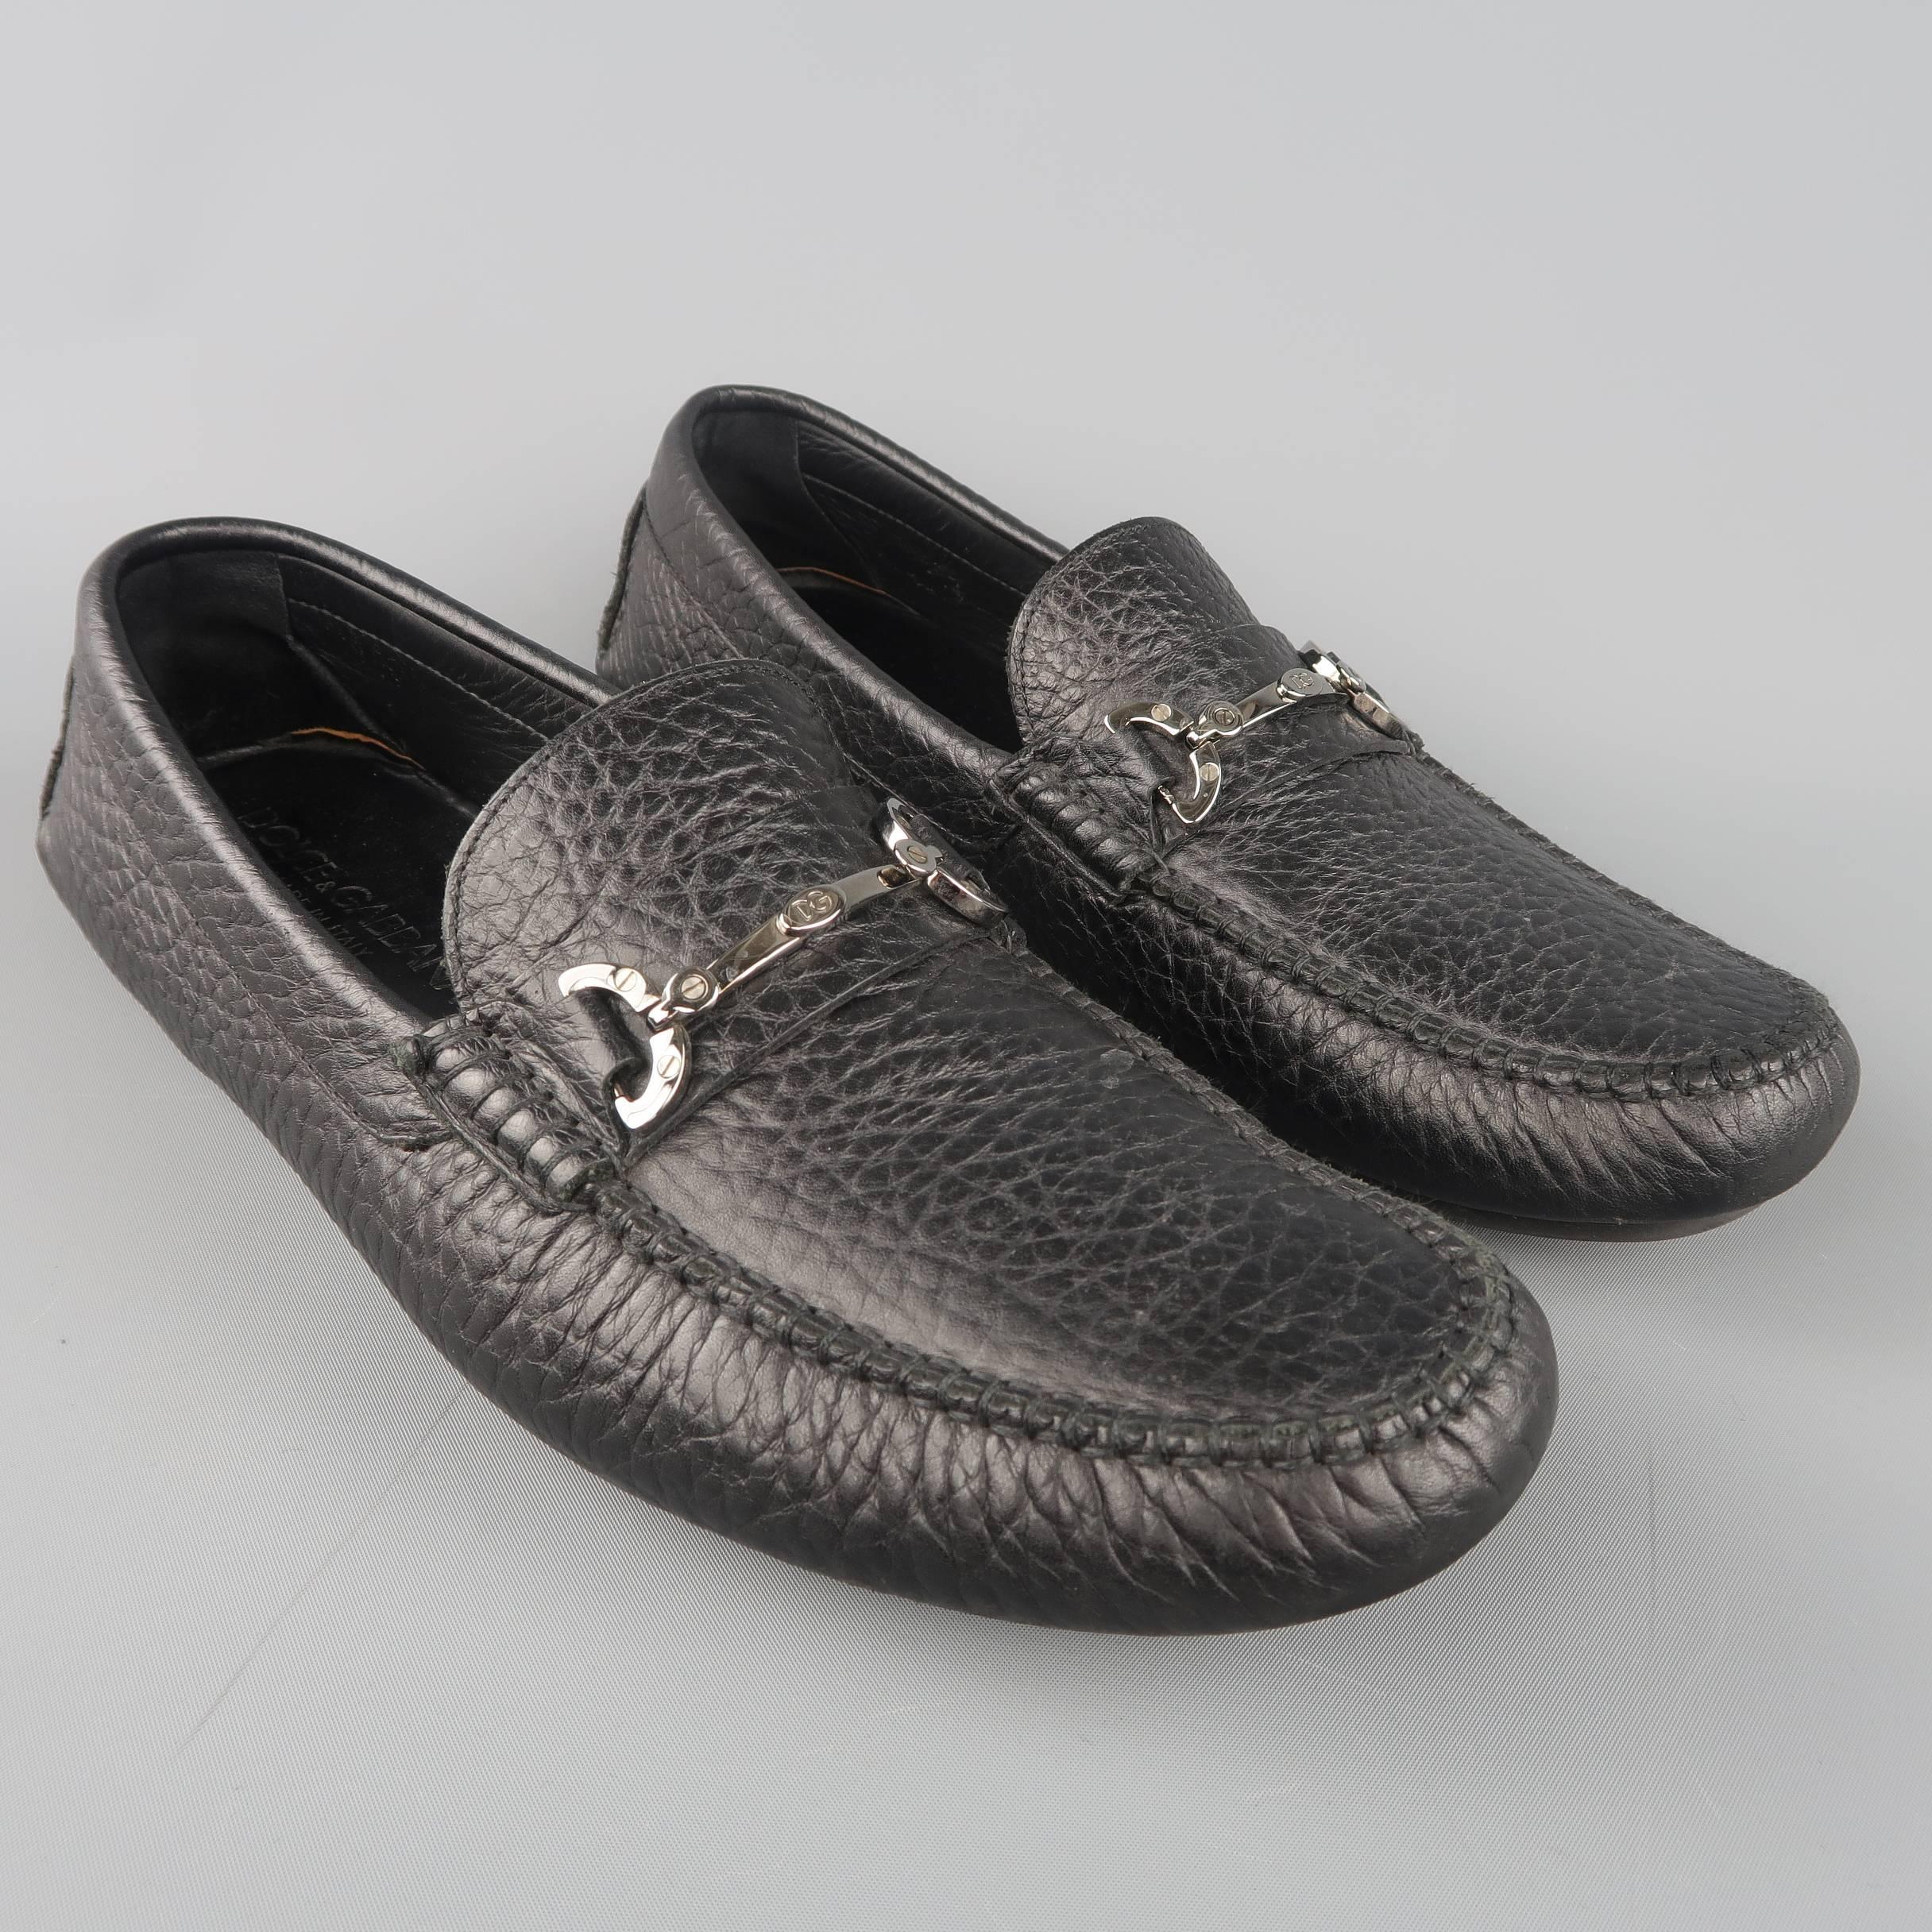 DOLCE & GABBANA loafers come in black textured leather with a top stitch apron toe, rubber driver sole, and dark silver tone metal horsebit. Made in Italy.
 
Good Pre-Owned Condition.
Marked: UK 9
 
Outsole: 12 x 4 in.,
